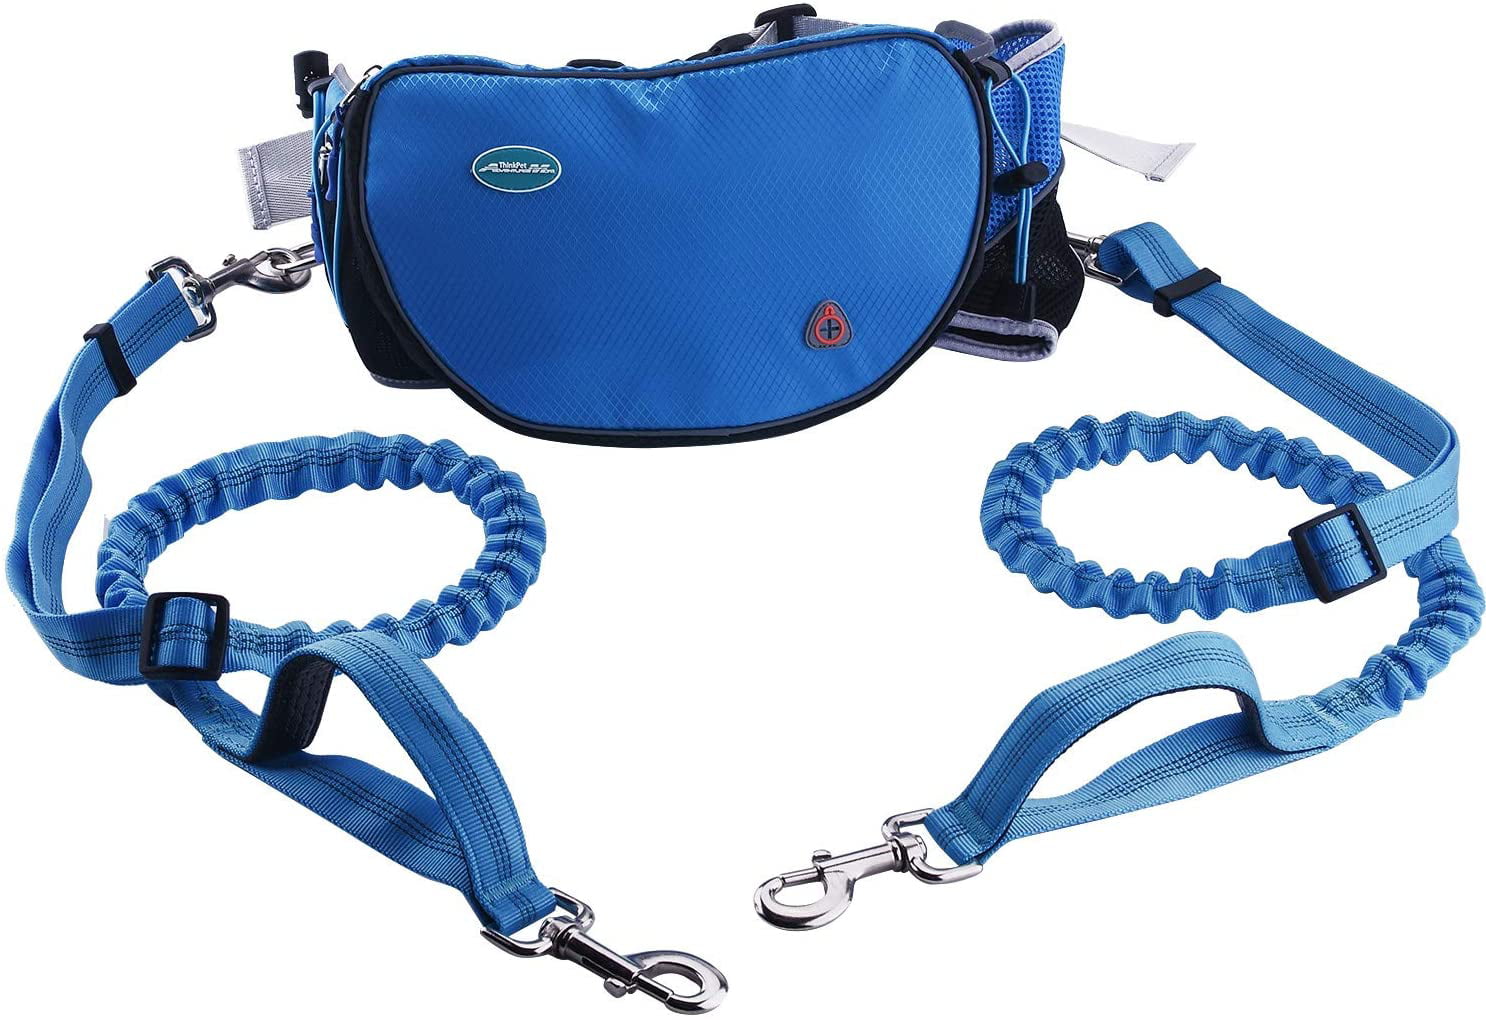 Reflective Adjustable Dog Walking Belt with Bungee Leads & Multifuntional Waist Pouch for Small Medium Large Dogs Durable for Jogging Hiking Walking ThinkPet Hands Free Dog Lead for Running 2 Dogs 